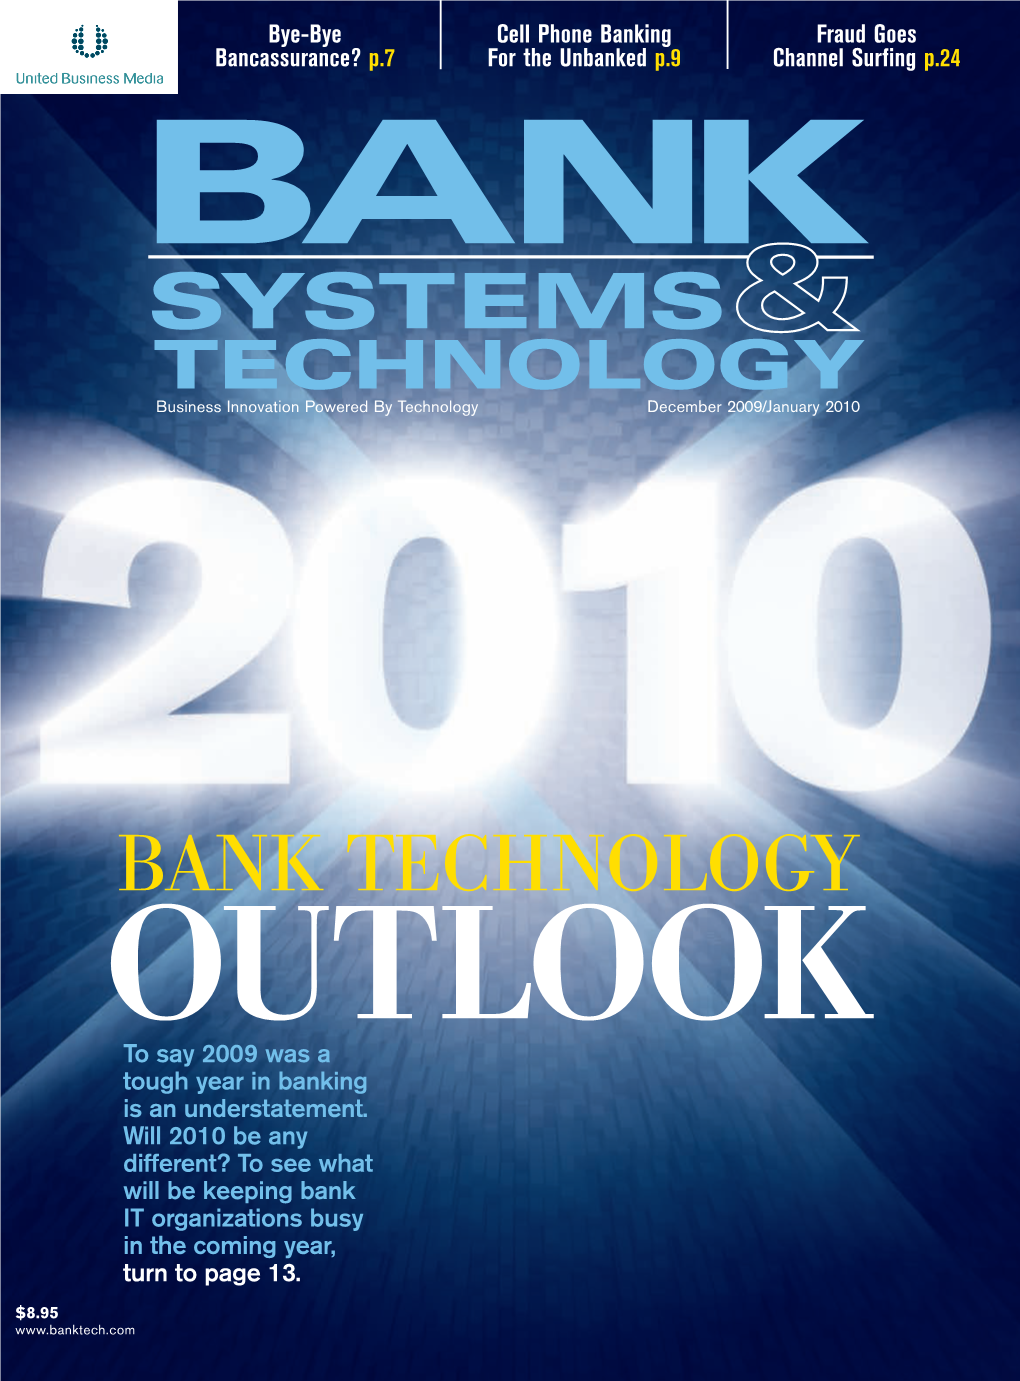 BANK TECHNOLOGY OUTLOOK to Say 2009 Was a Tough Year in Banking Is an Understatement